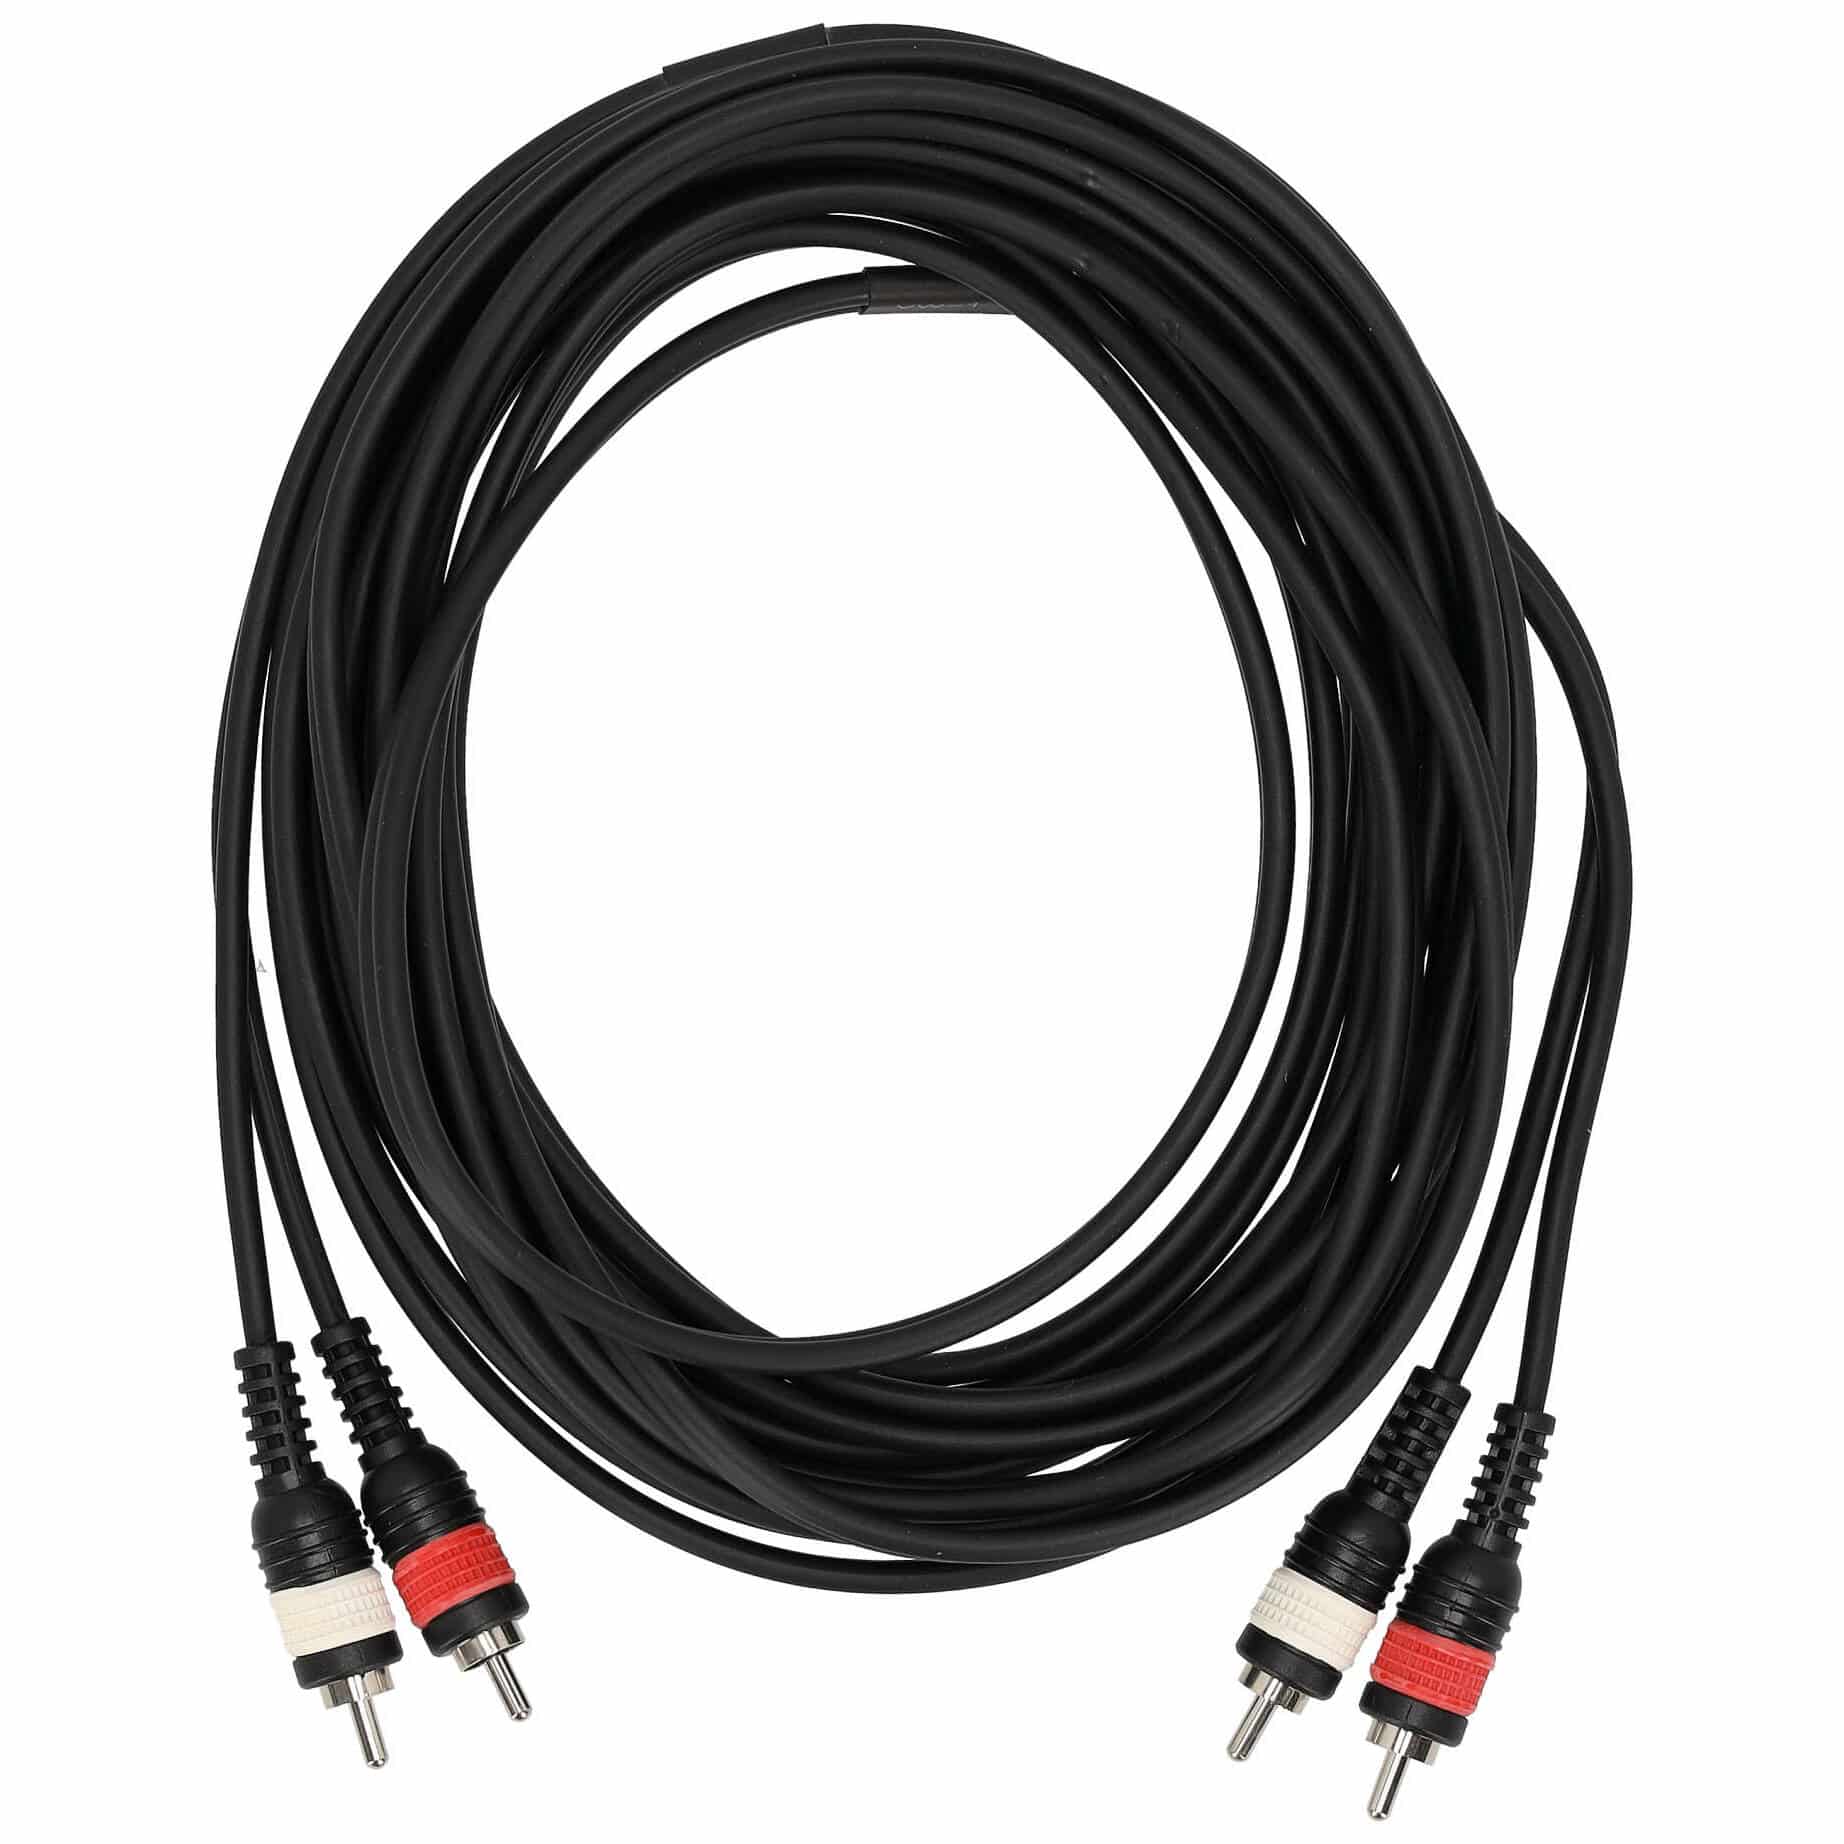 Sommer Cable BV-CICI-0600 SC-Onyx Basic 2 x Cinch Male - 2 x Cinch Male 6 Meter